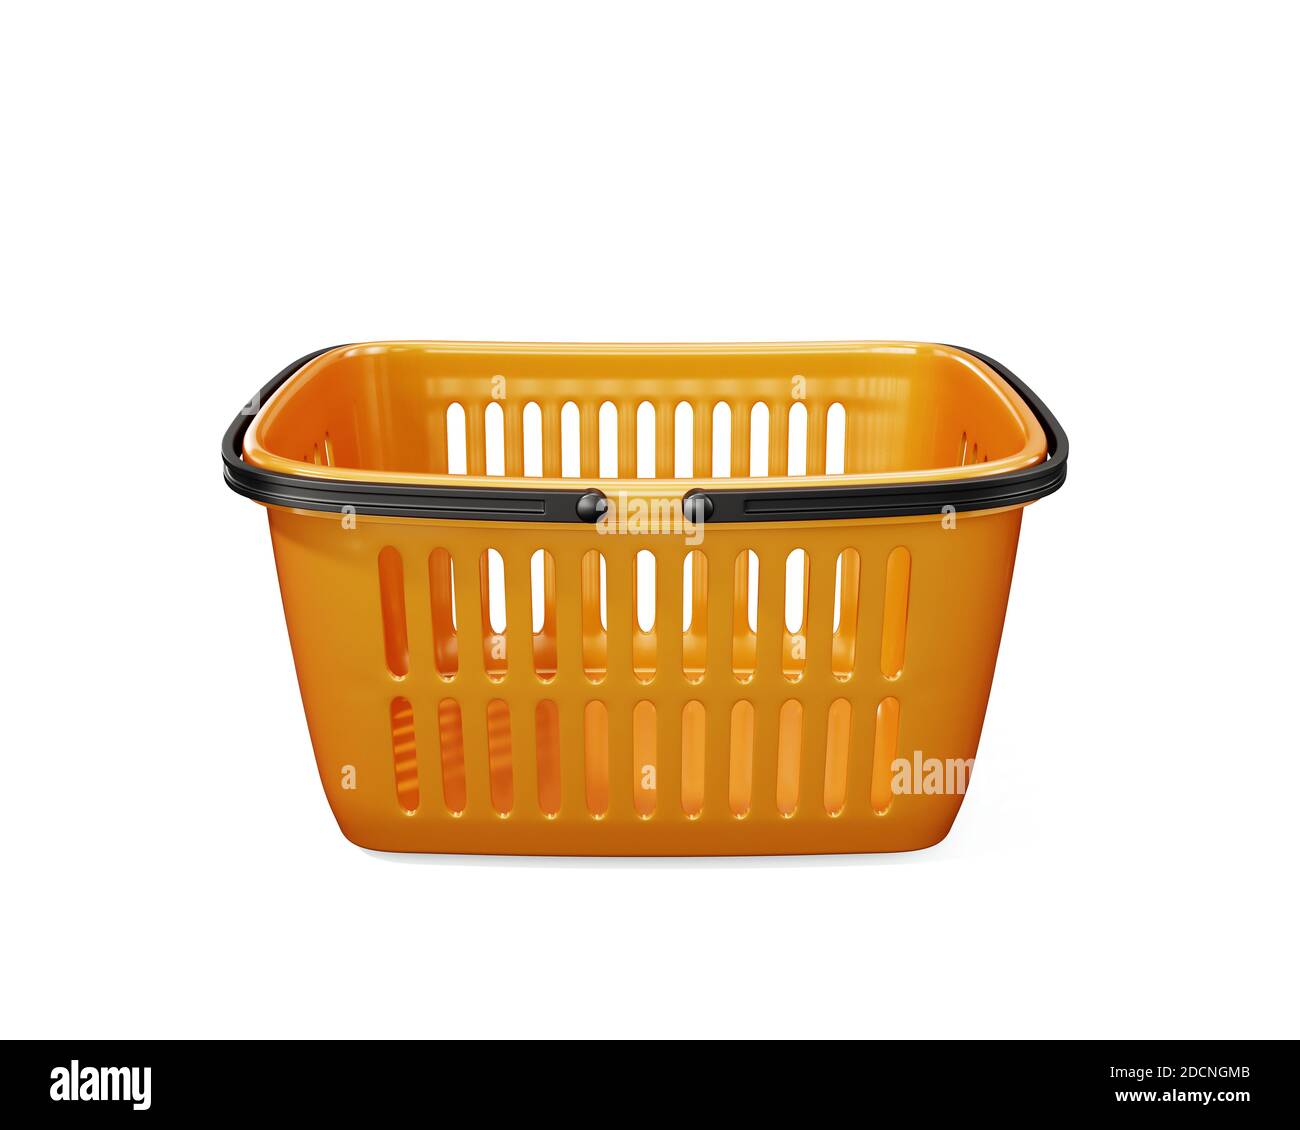 3d illustration of side view yellow shopping basket isolated on white background Stock Photo